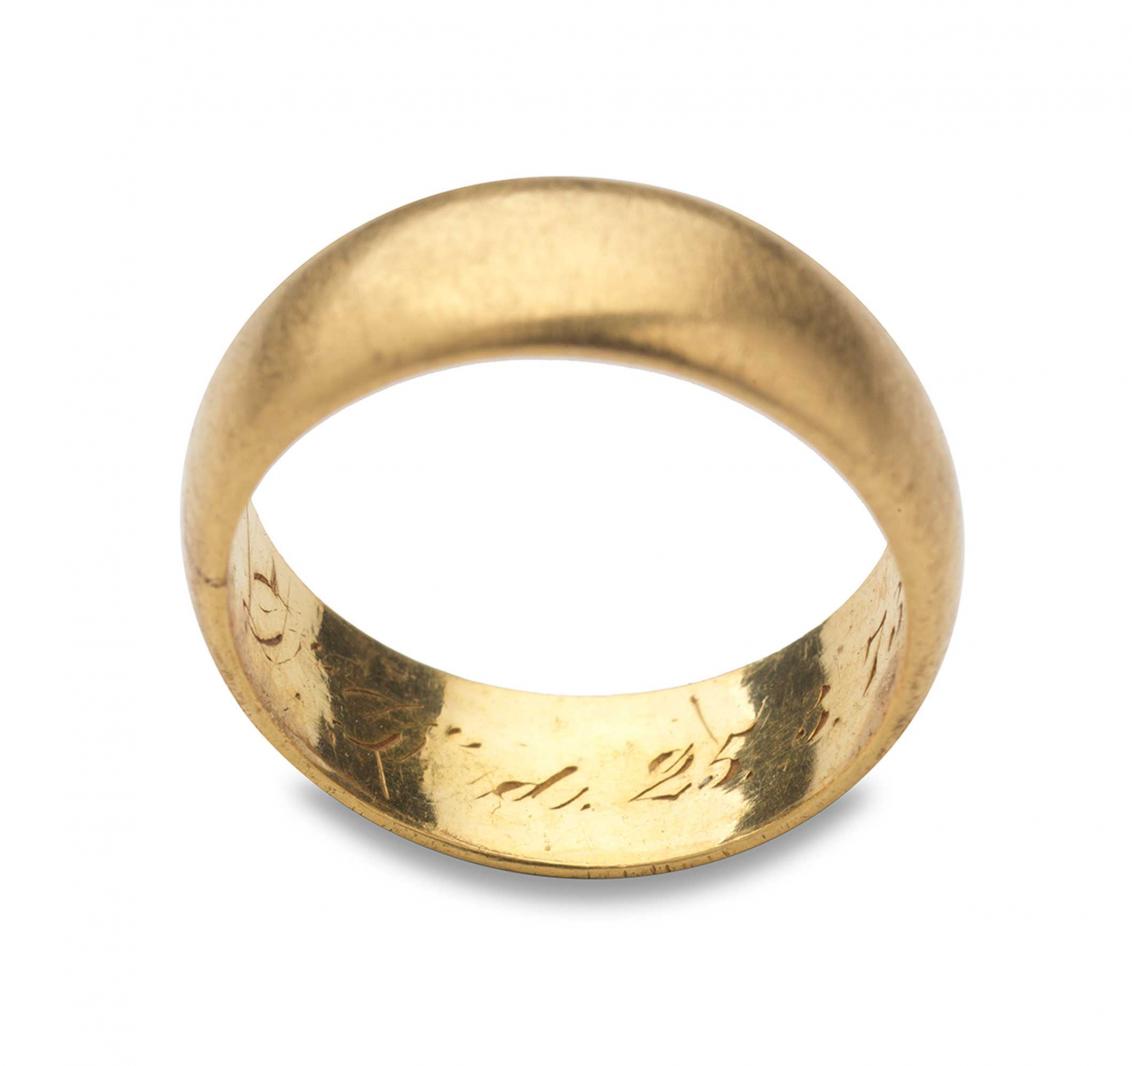 Golden ring with inscription "D. D. 25.3.73".